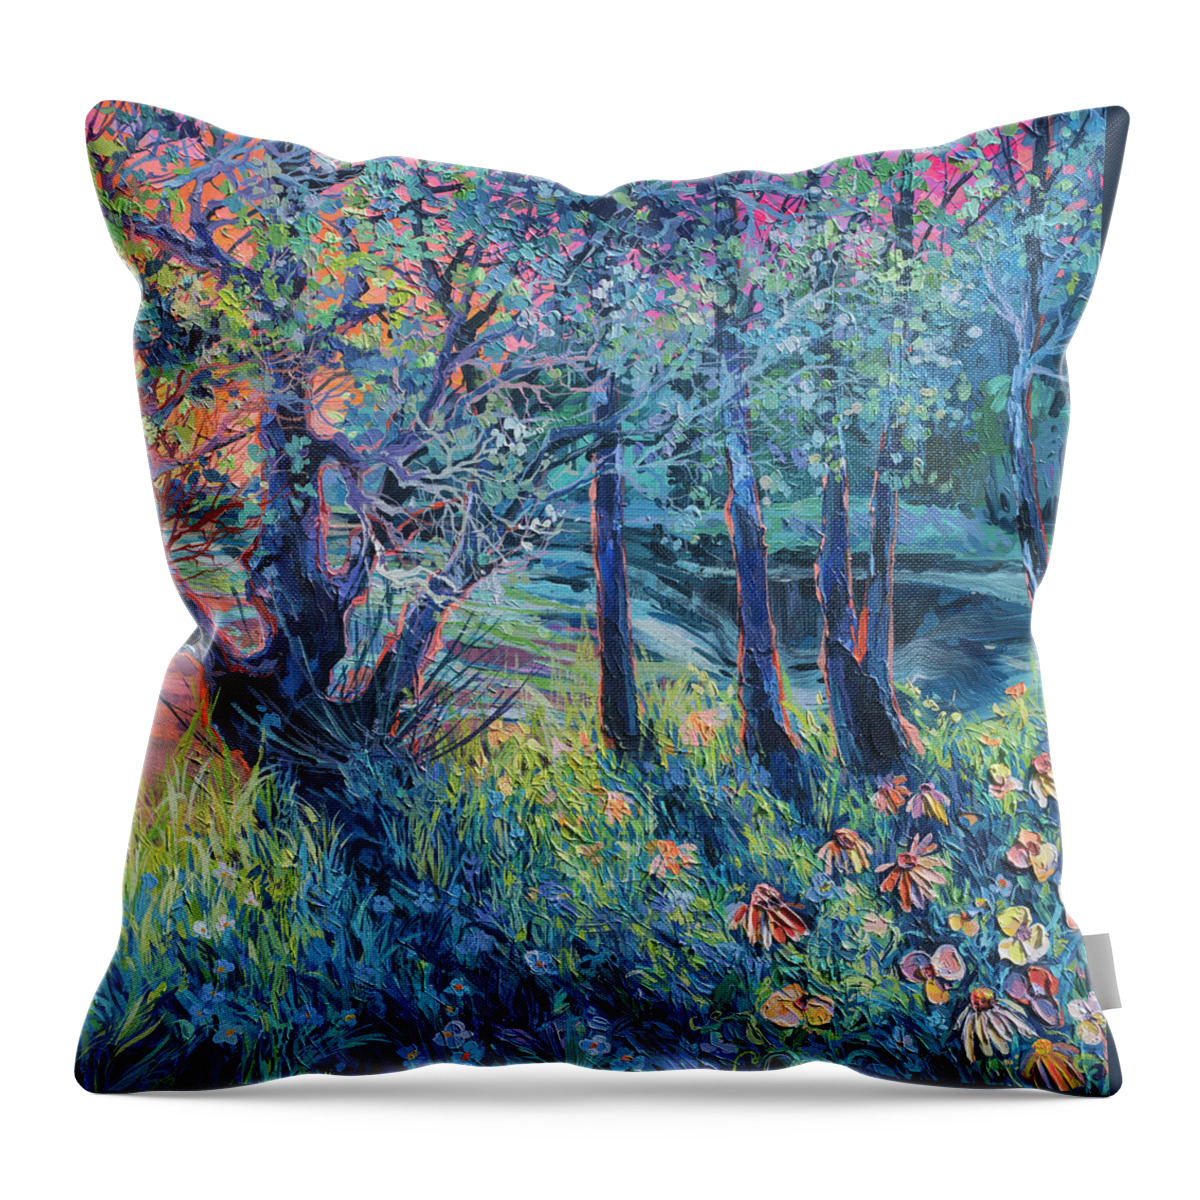  Throw Pillow featuring the painting To Meet The Dawn. First Part by Anastasia Trusova